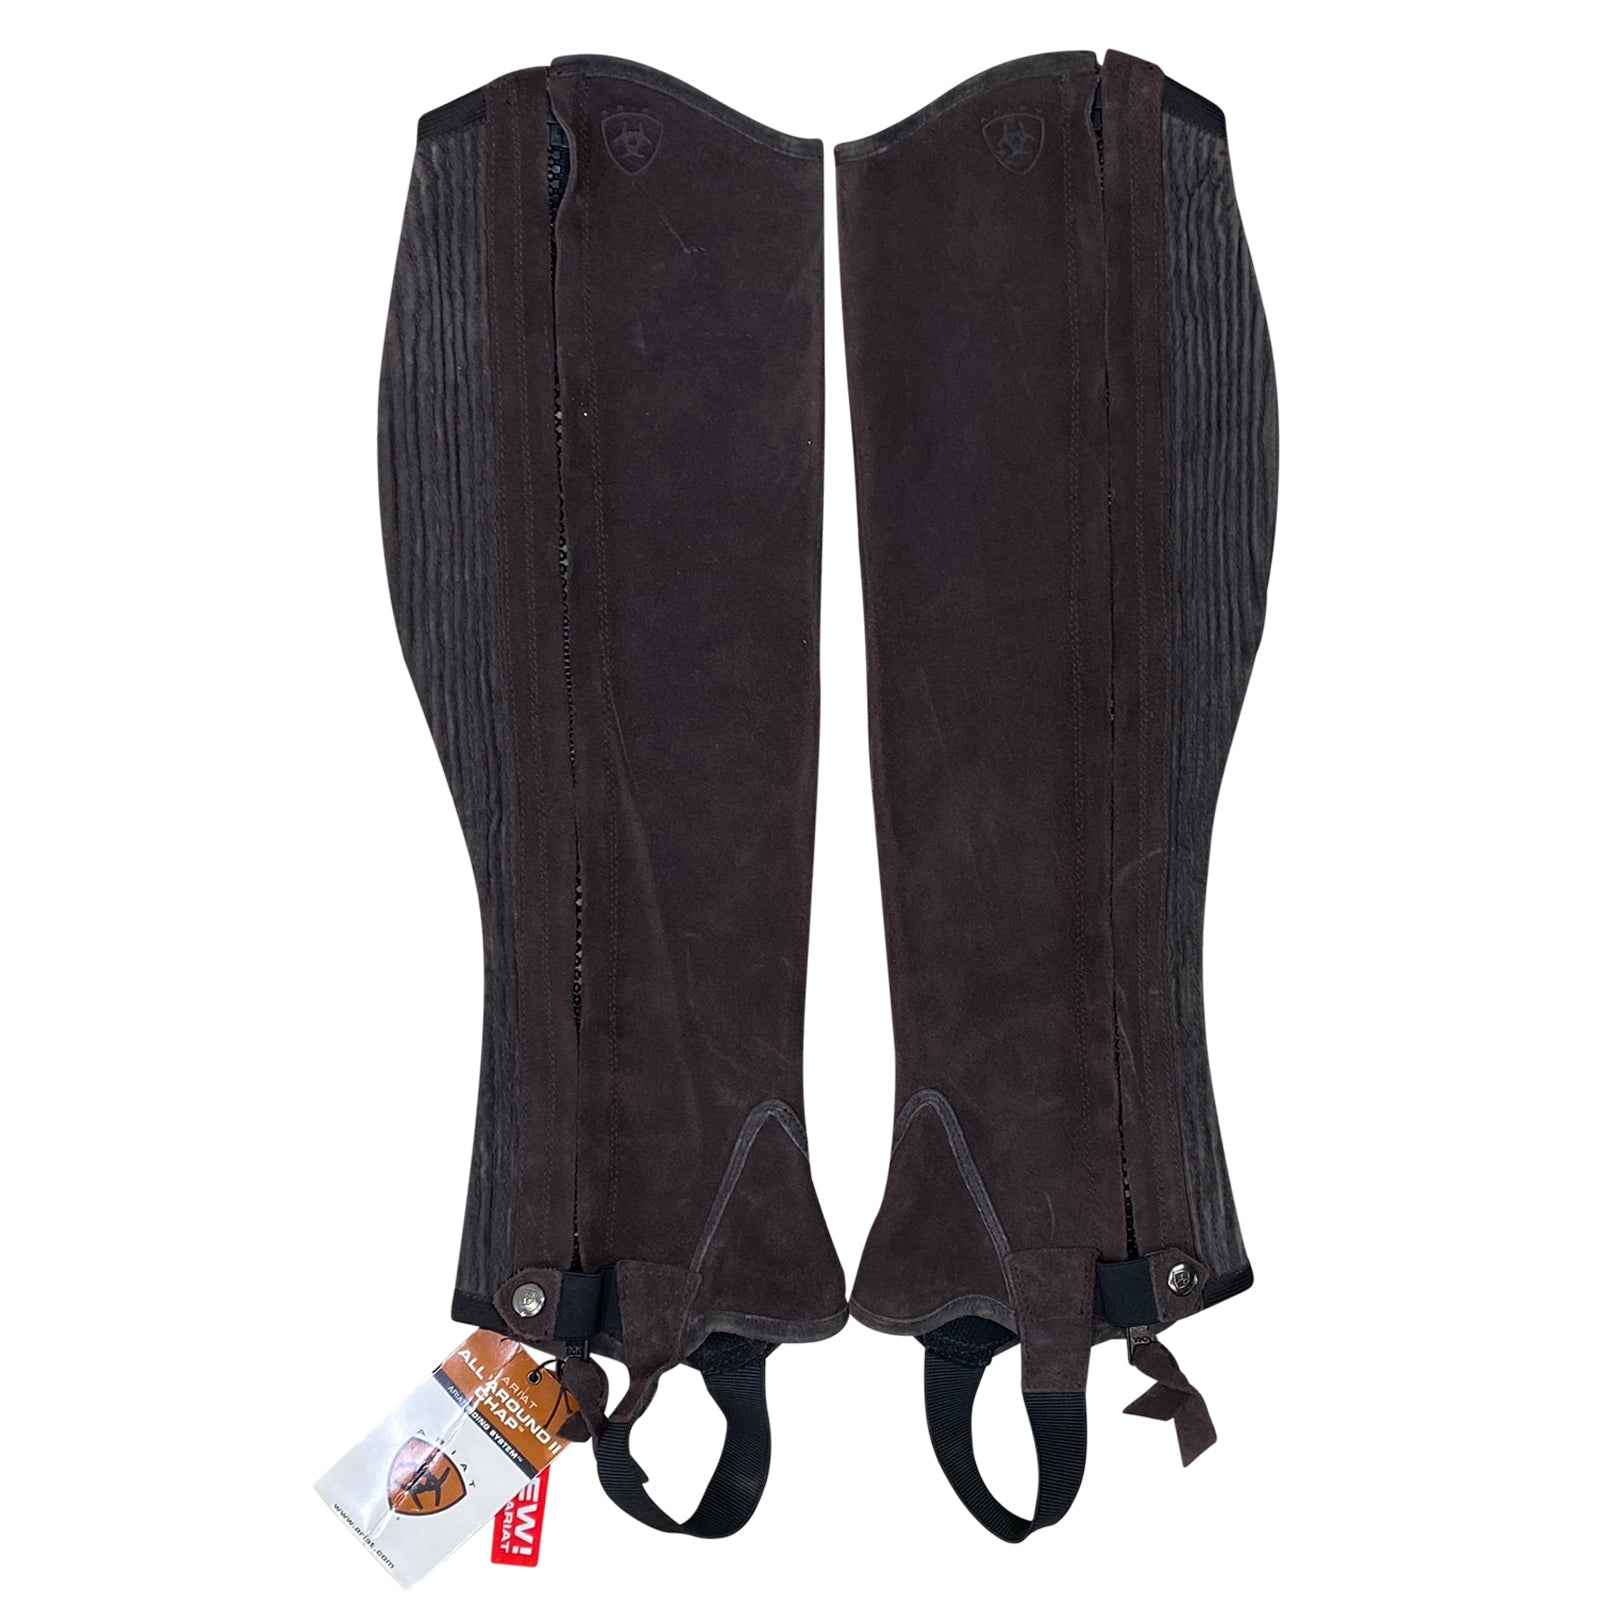 Ariat All Around Half Chaps II in Brown 